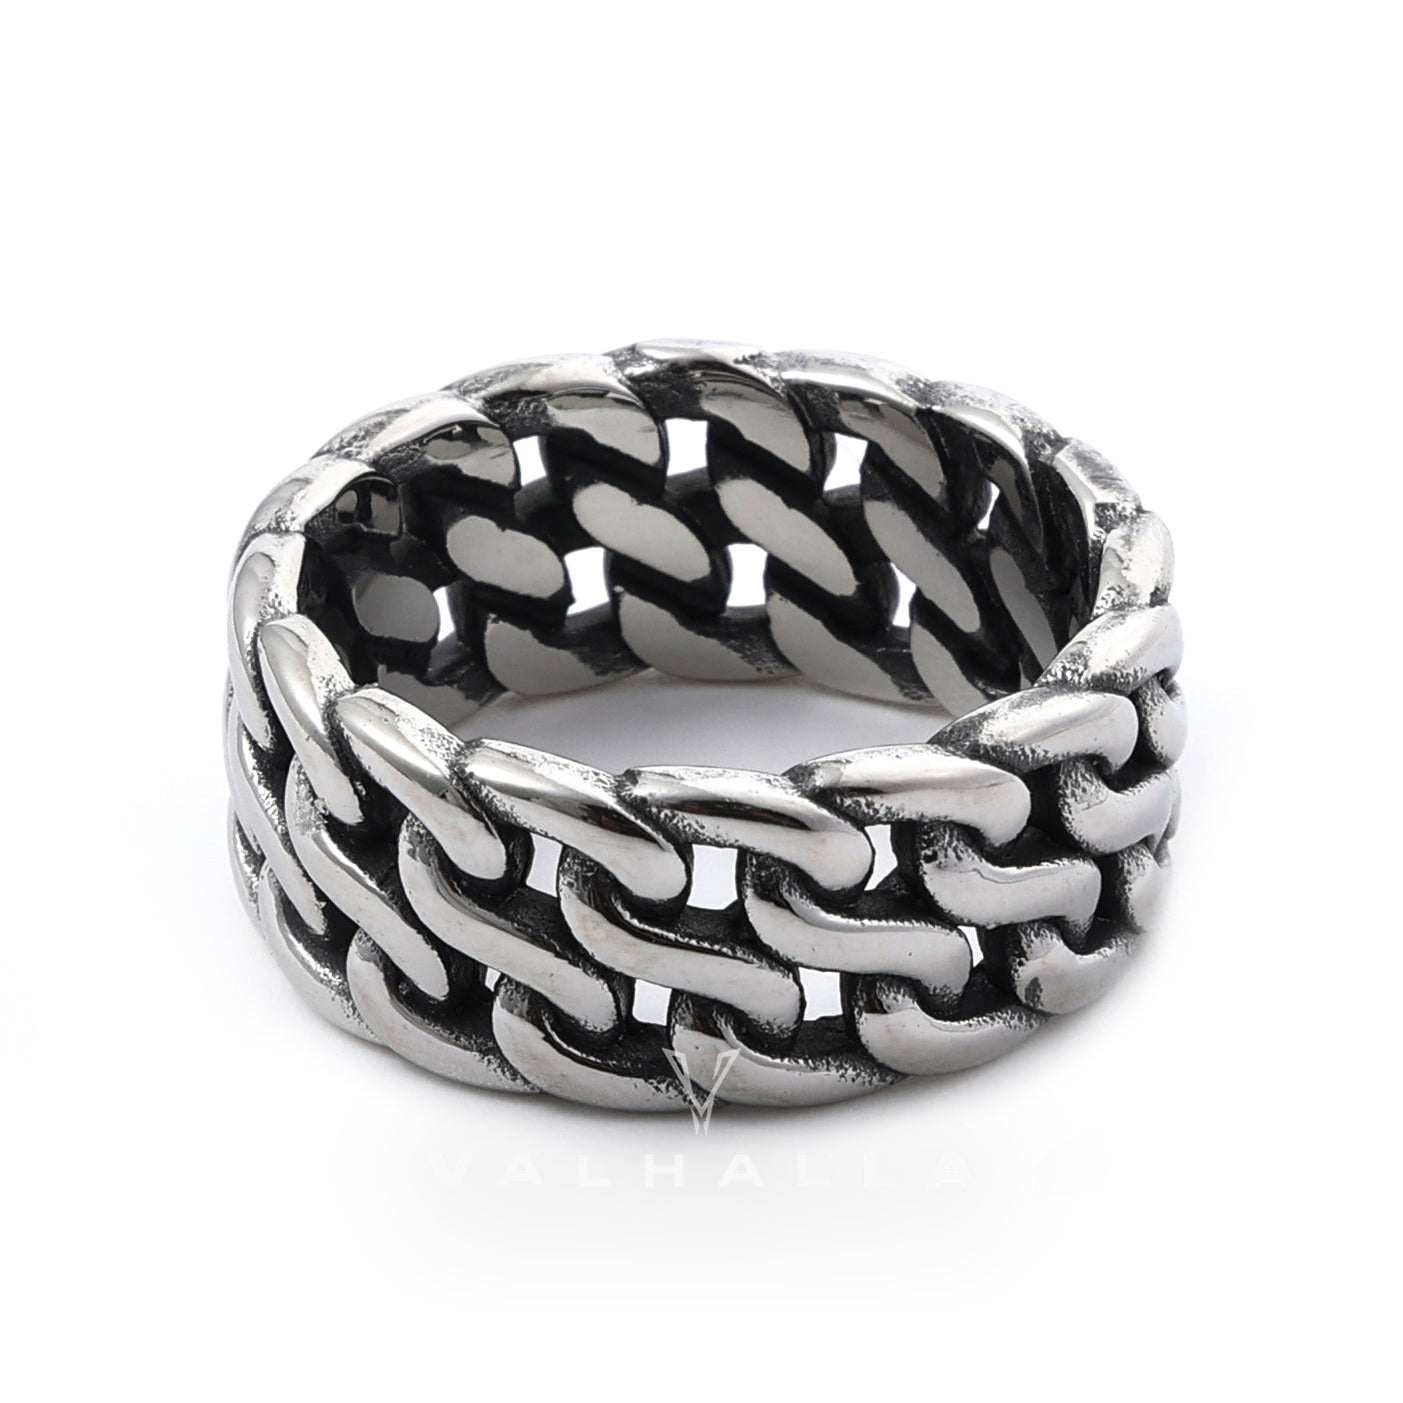 Minimalist Chain Style Stainless Steel Ring